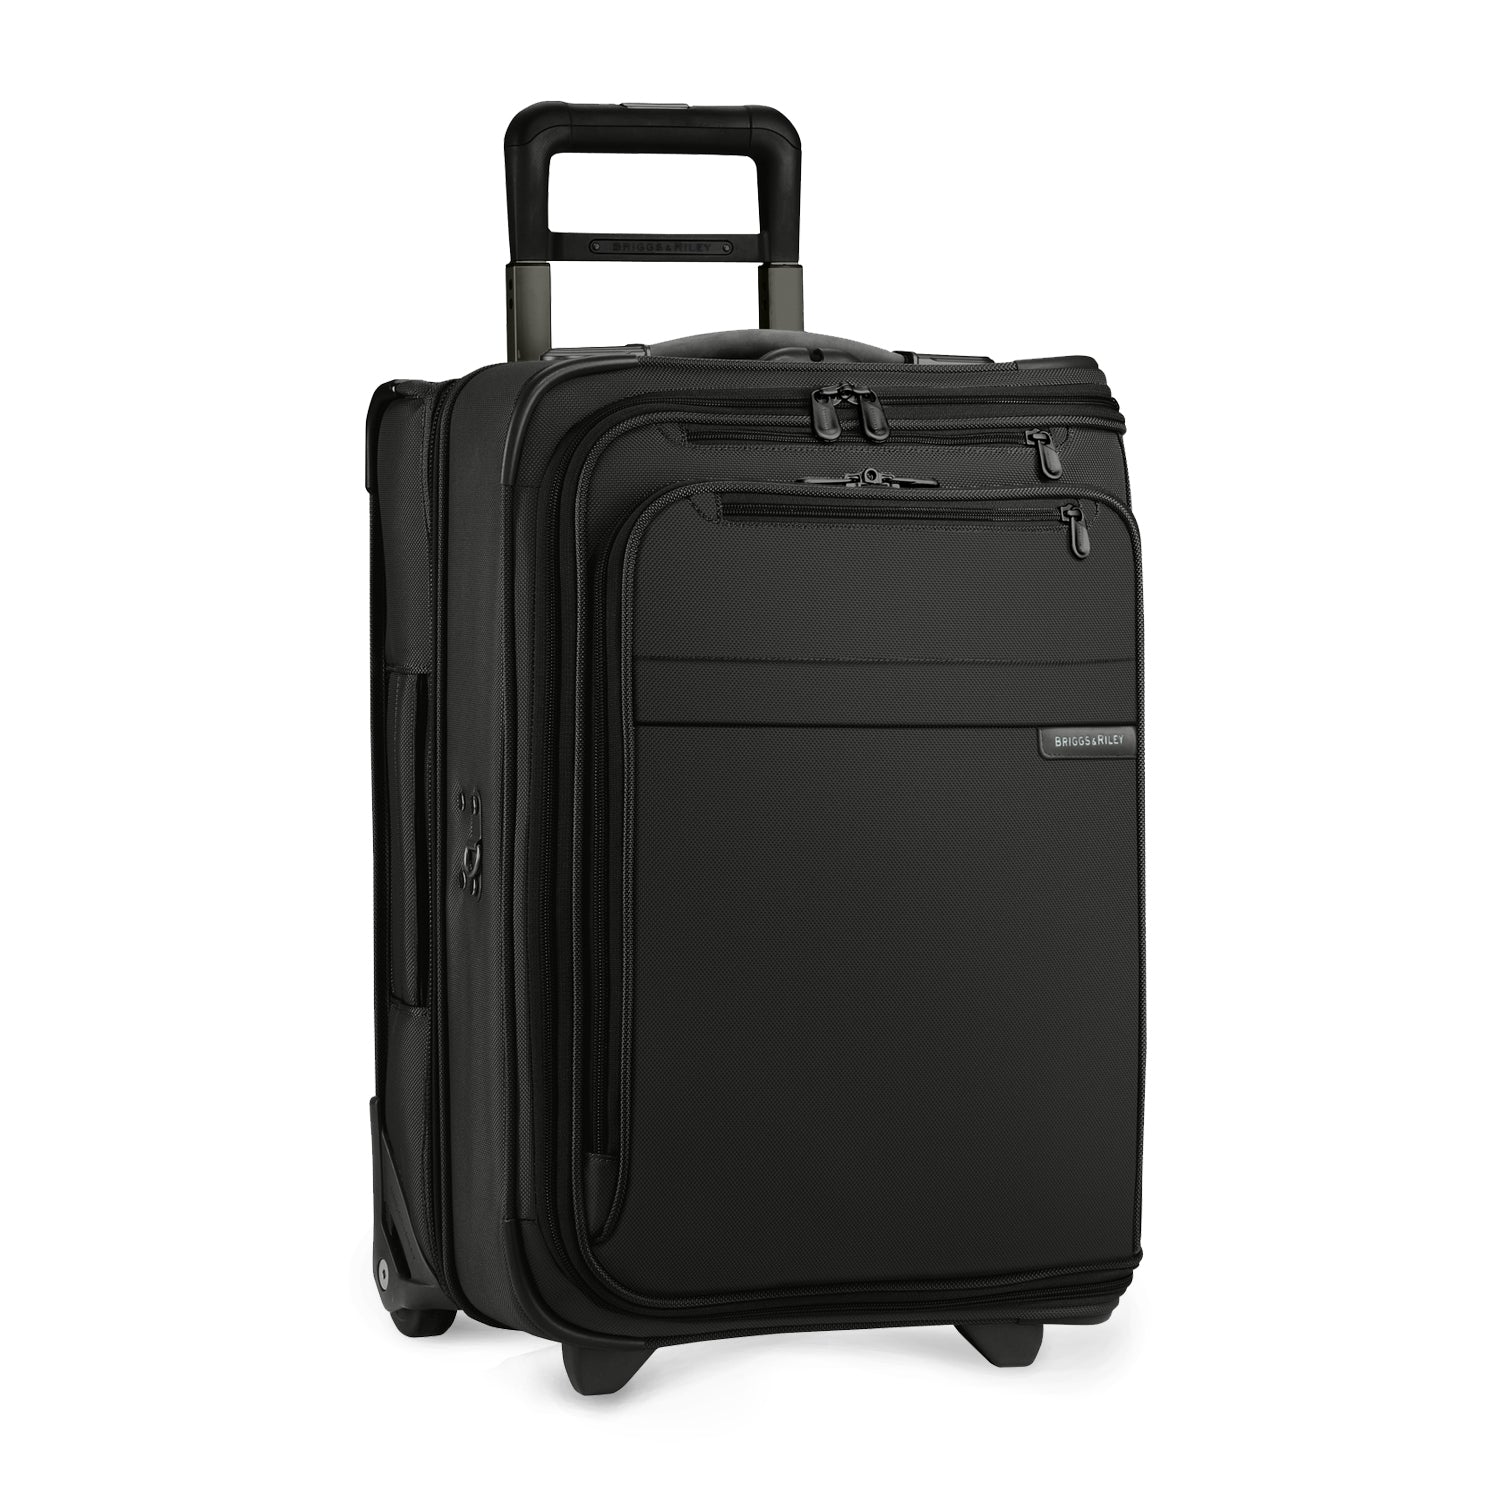 Carry-On Upright Garment Bag with Wheels | Briggs & Riley